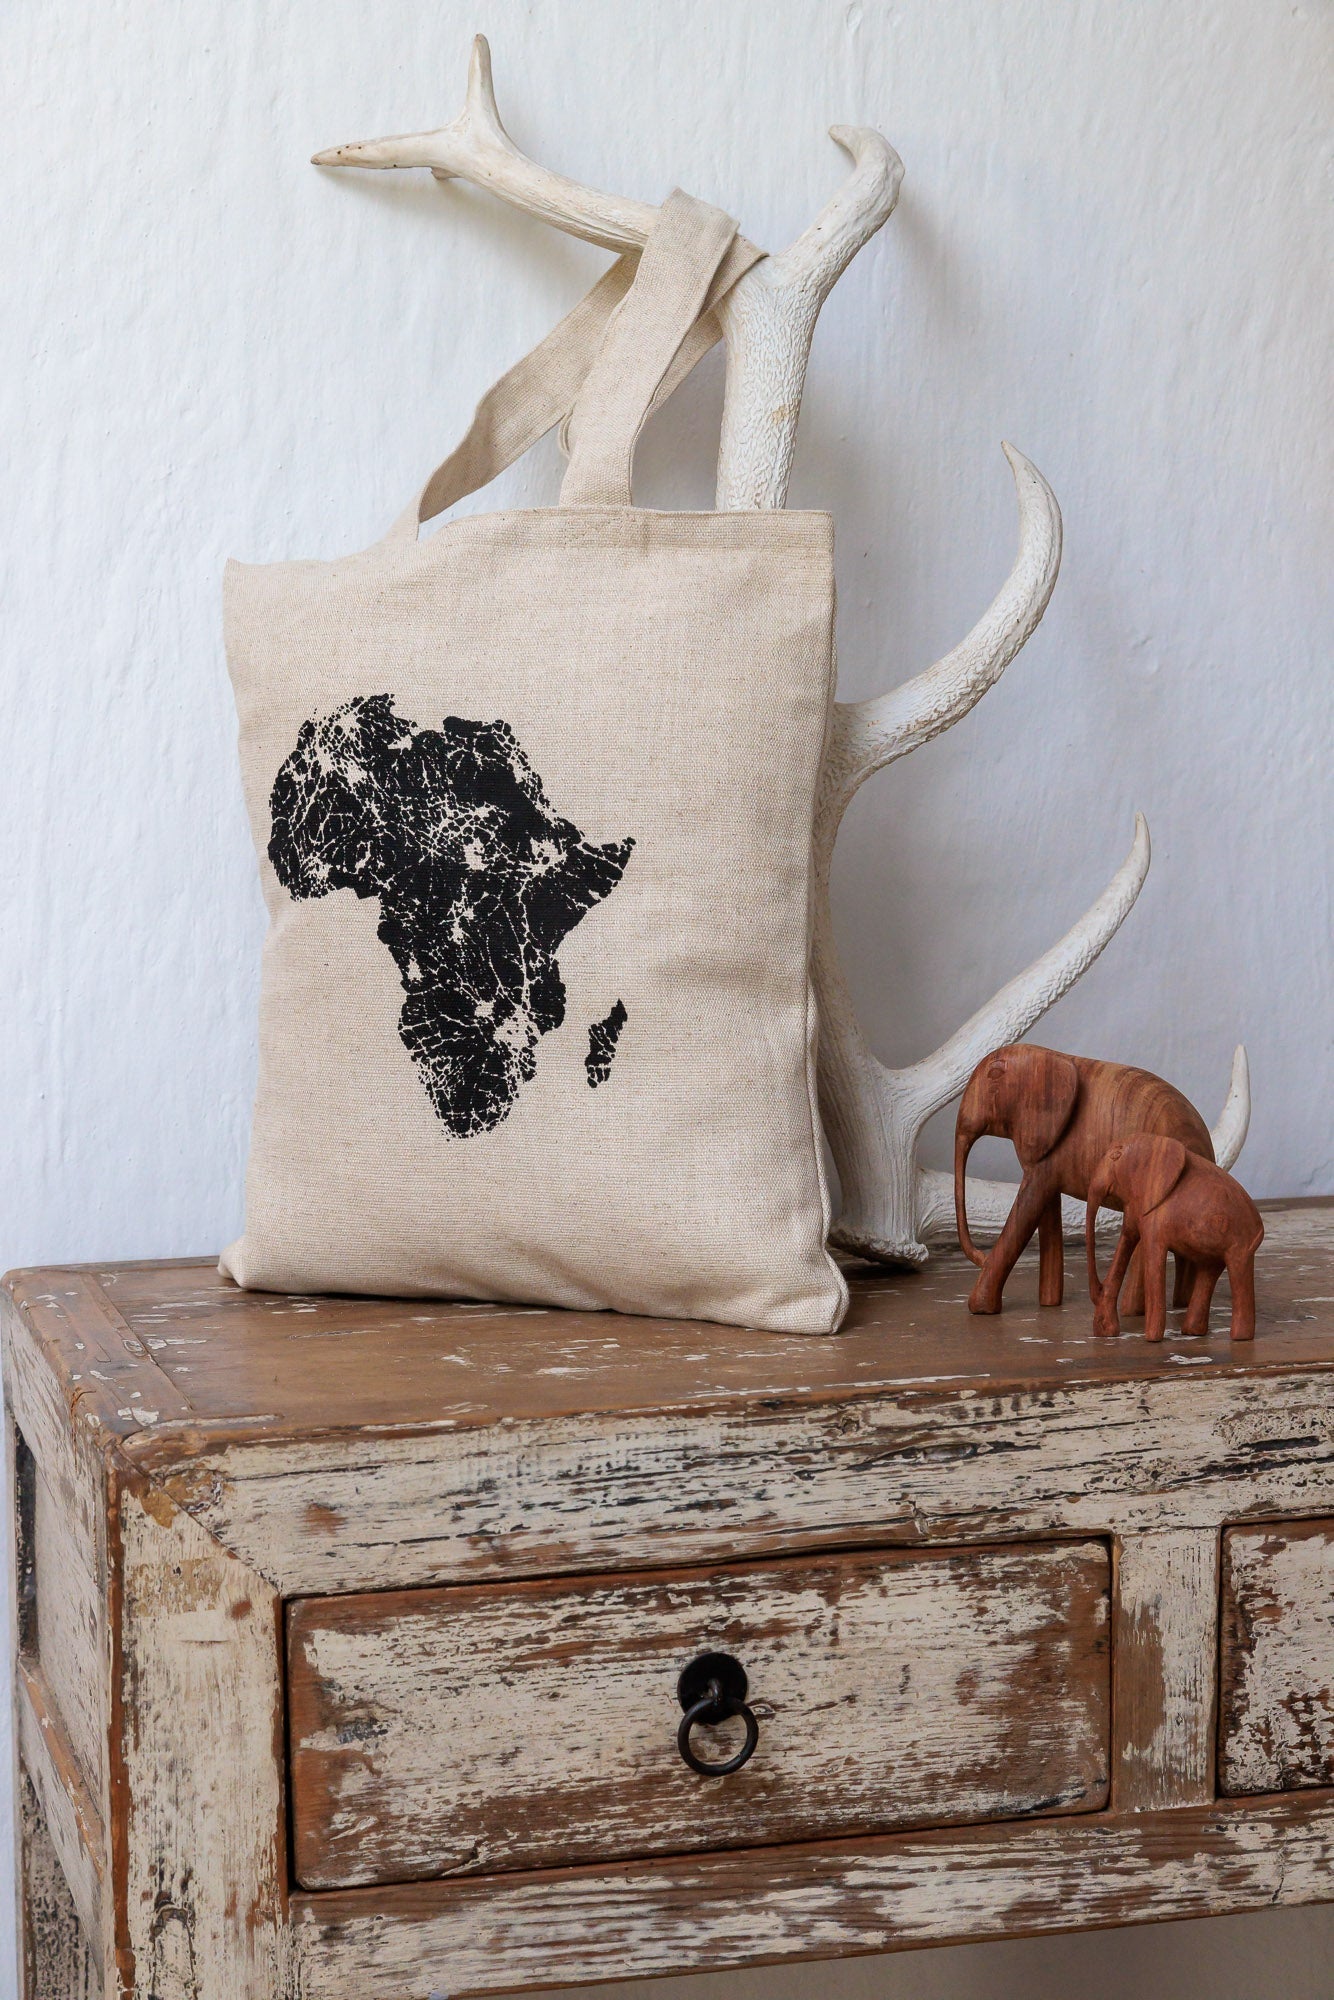 Africa Tote Bag (Limited Edition) - The perfect tote bag with an African print bag.